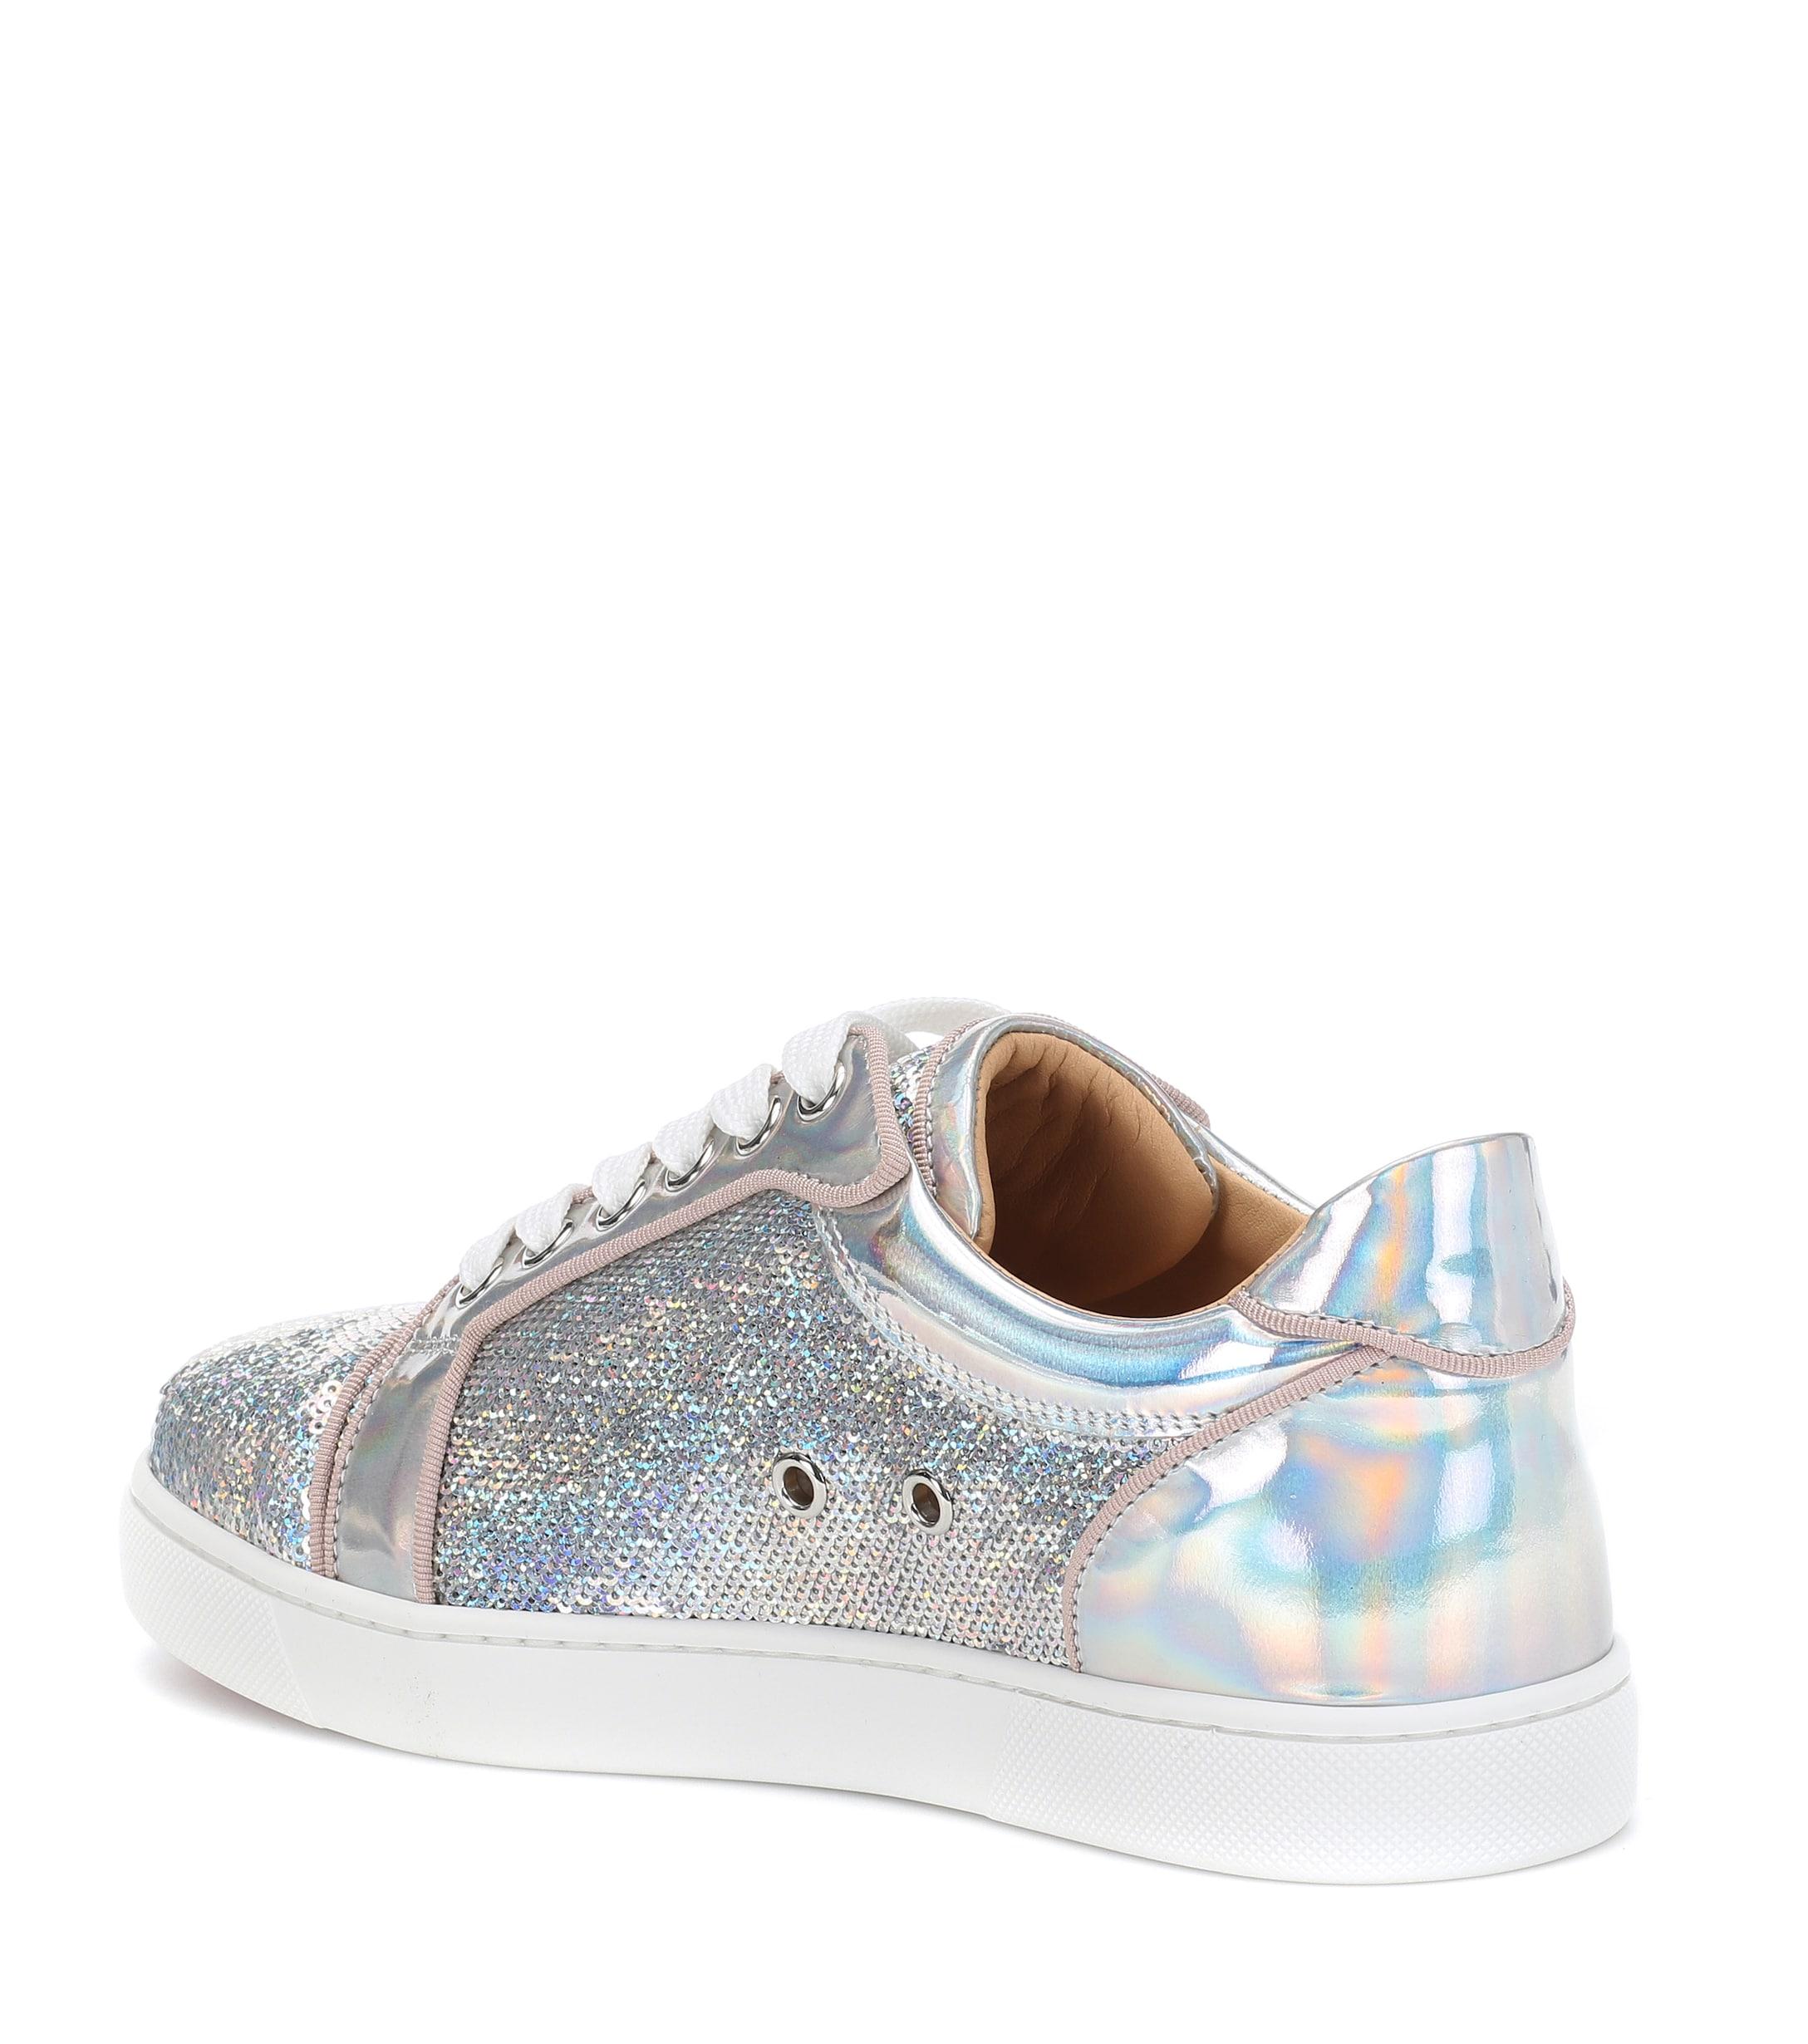 Christian Louboutin Vieira Sequined Sneakers in Silver (Metallic) - Lyst